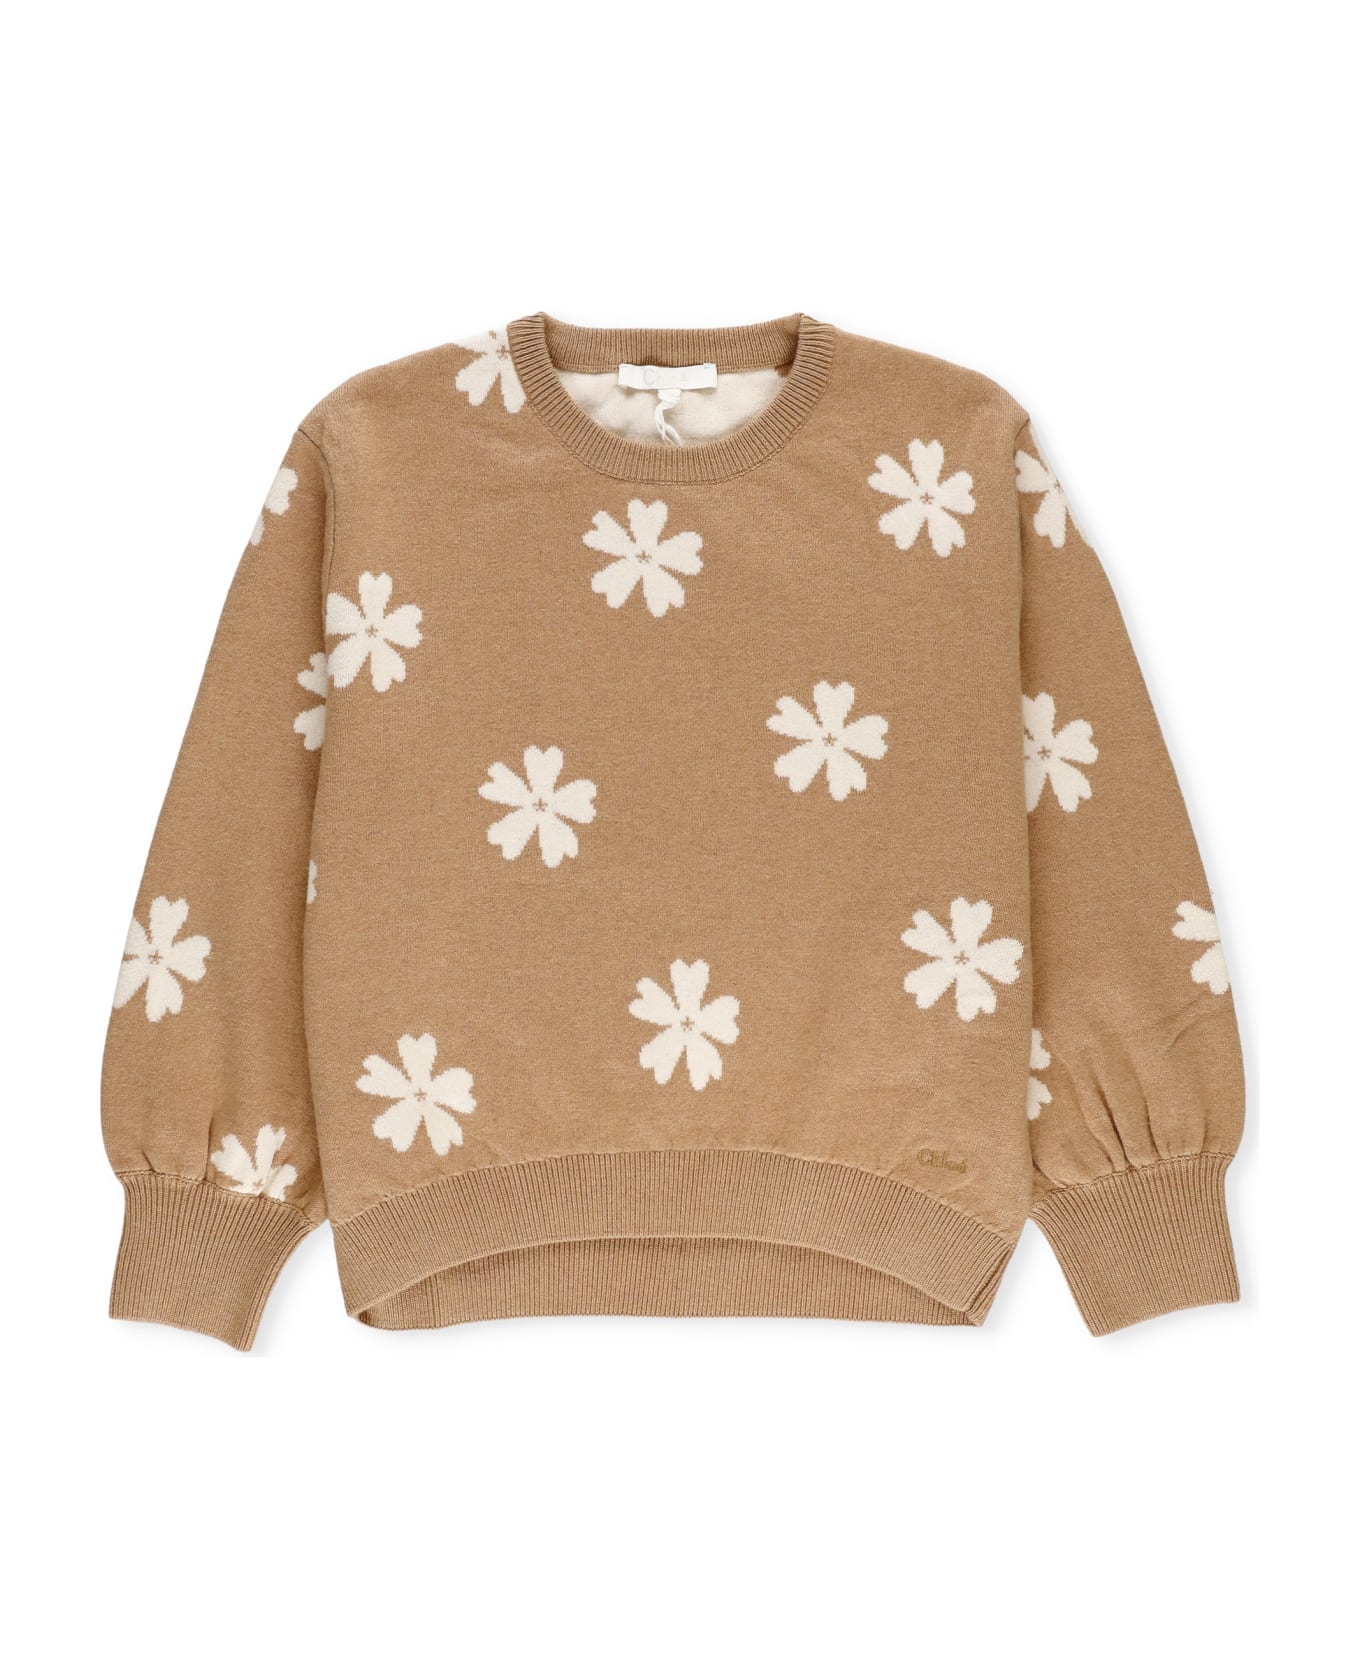 Chloé Cotton And Wool Sweater - Brown